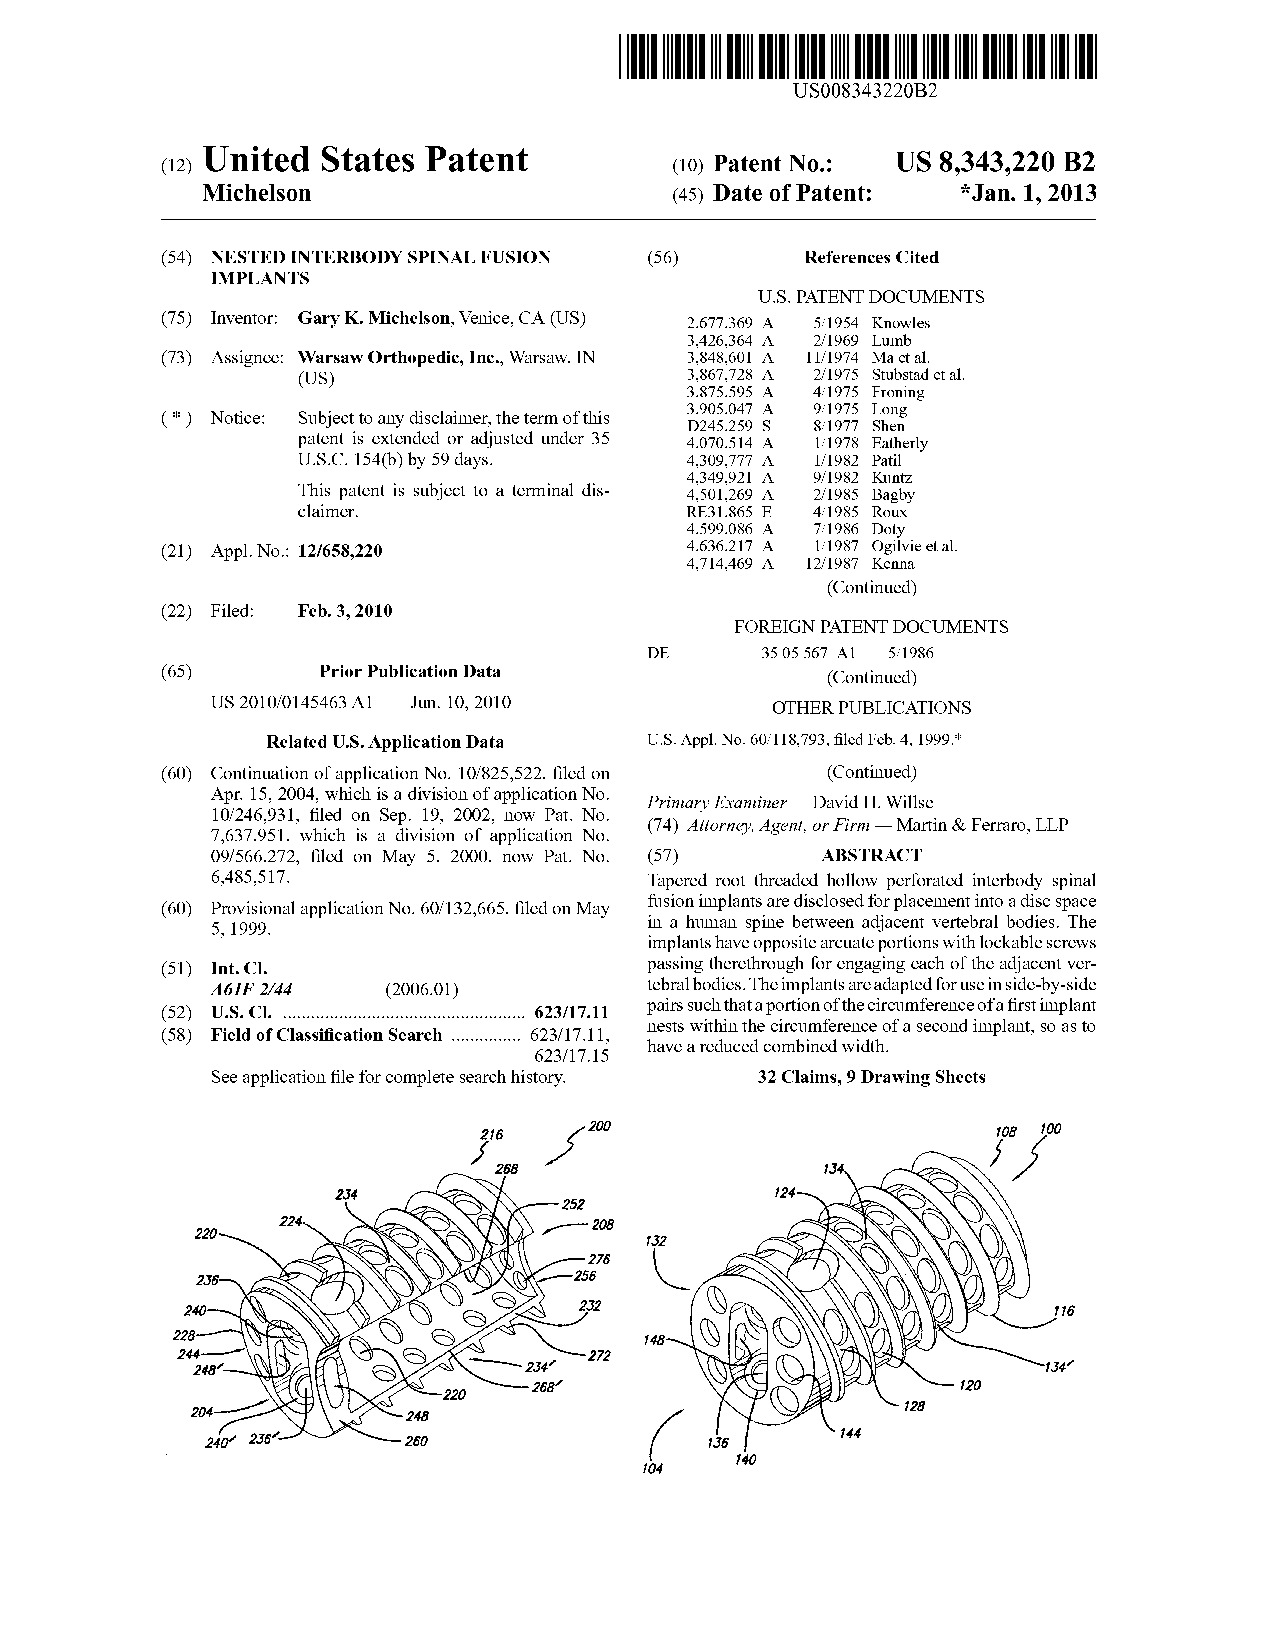 Nested interbody spinal fusion implants - Patent 8,343,220